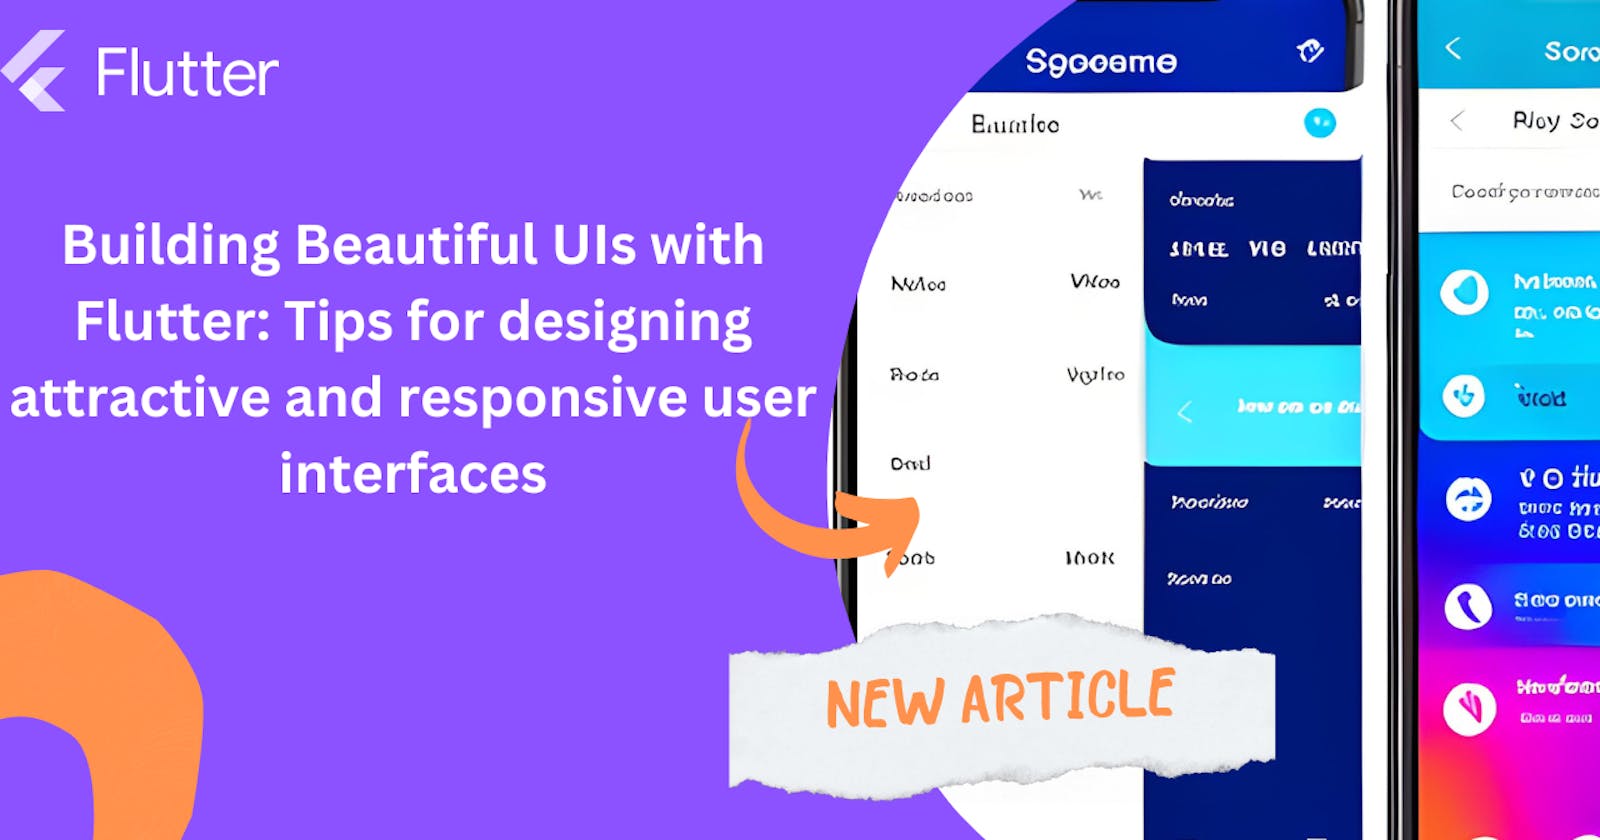 Building Beautiful UIs with Flutter: Tips for designing attractive and responsive user interfaces